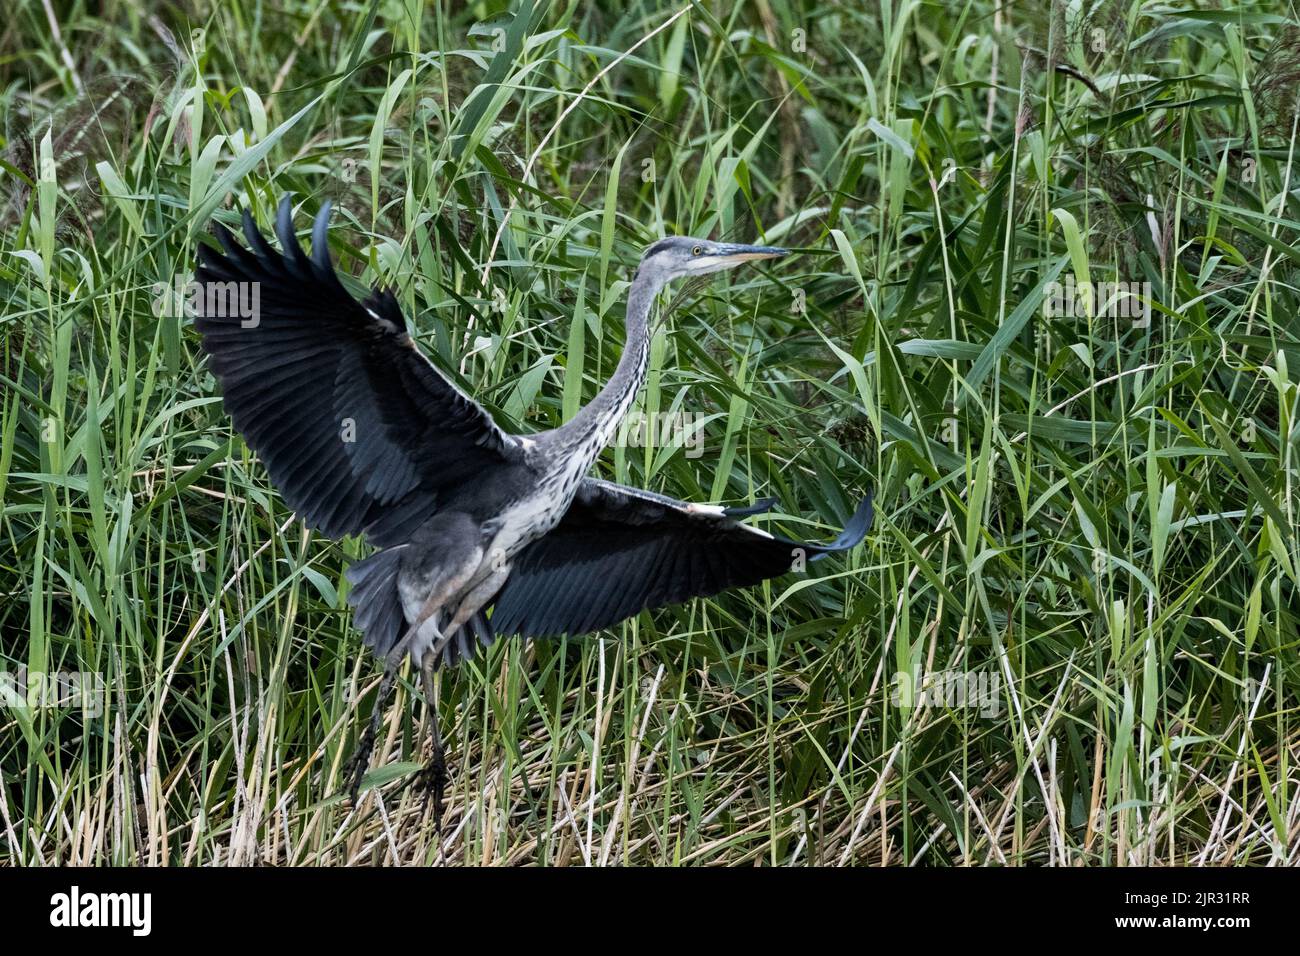 A grey heron just after taking off from a dried marsh with reeds in  the background. Stock Photo